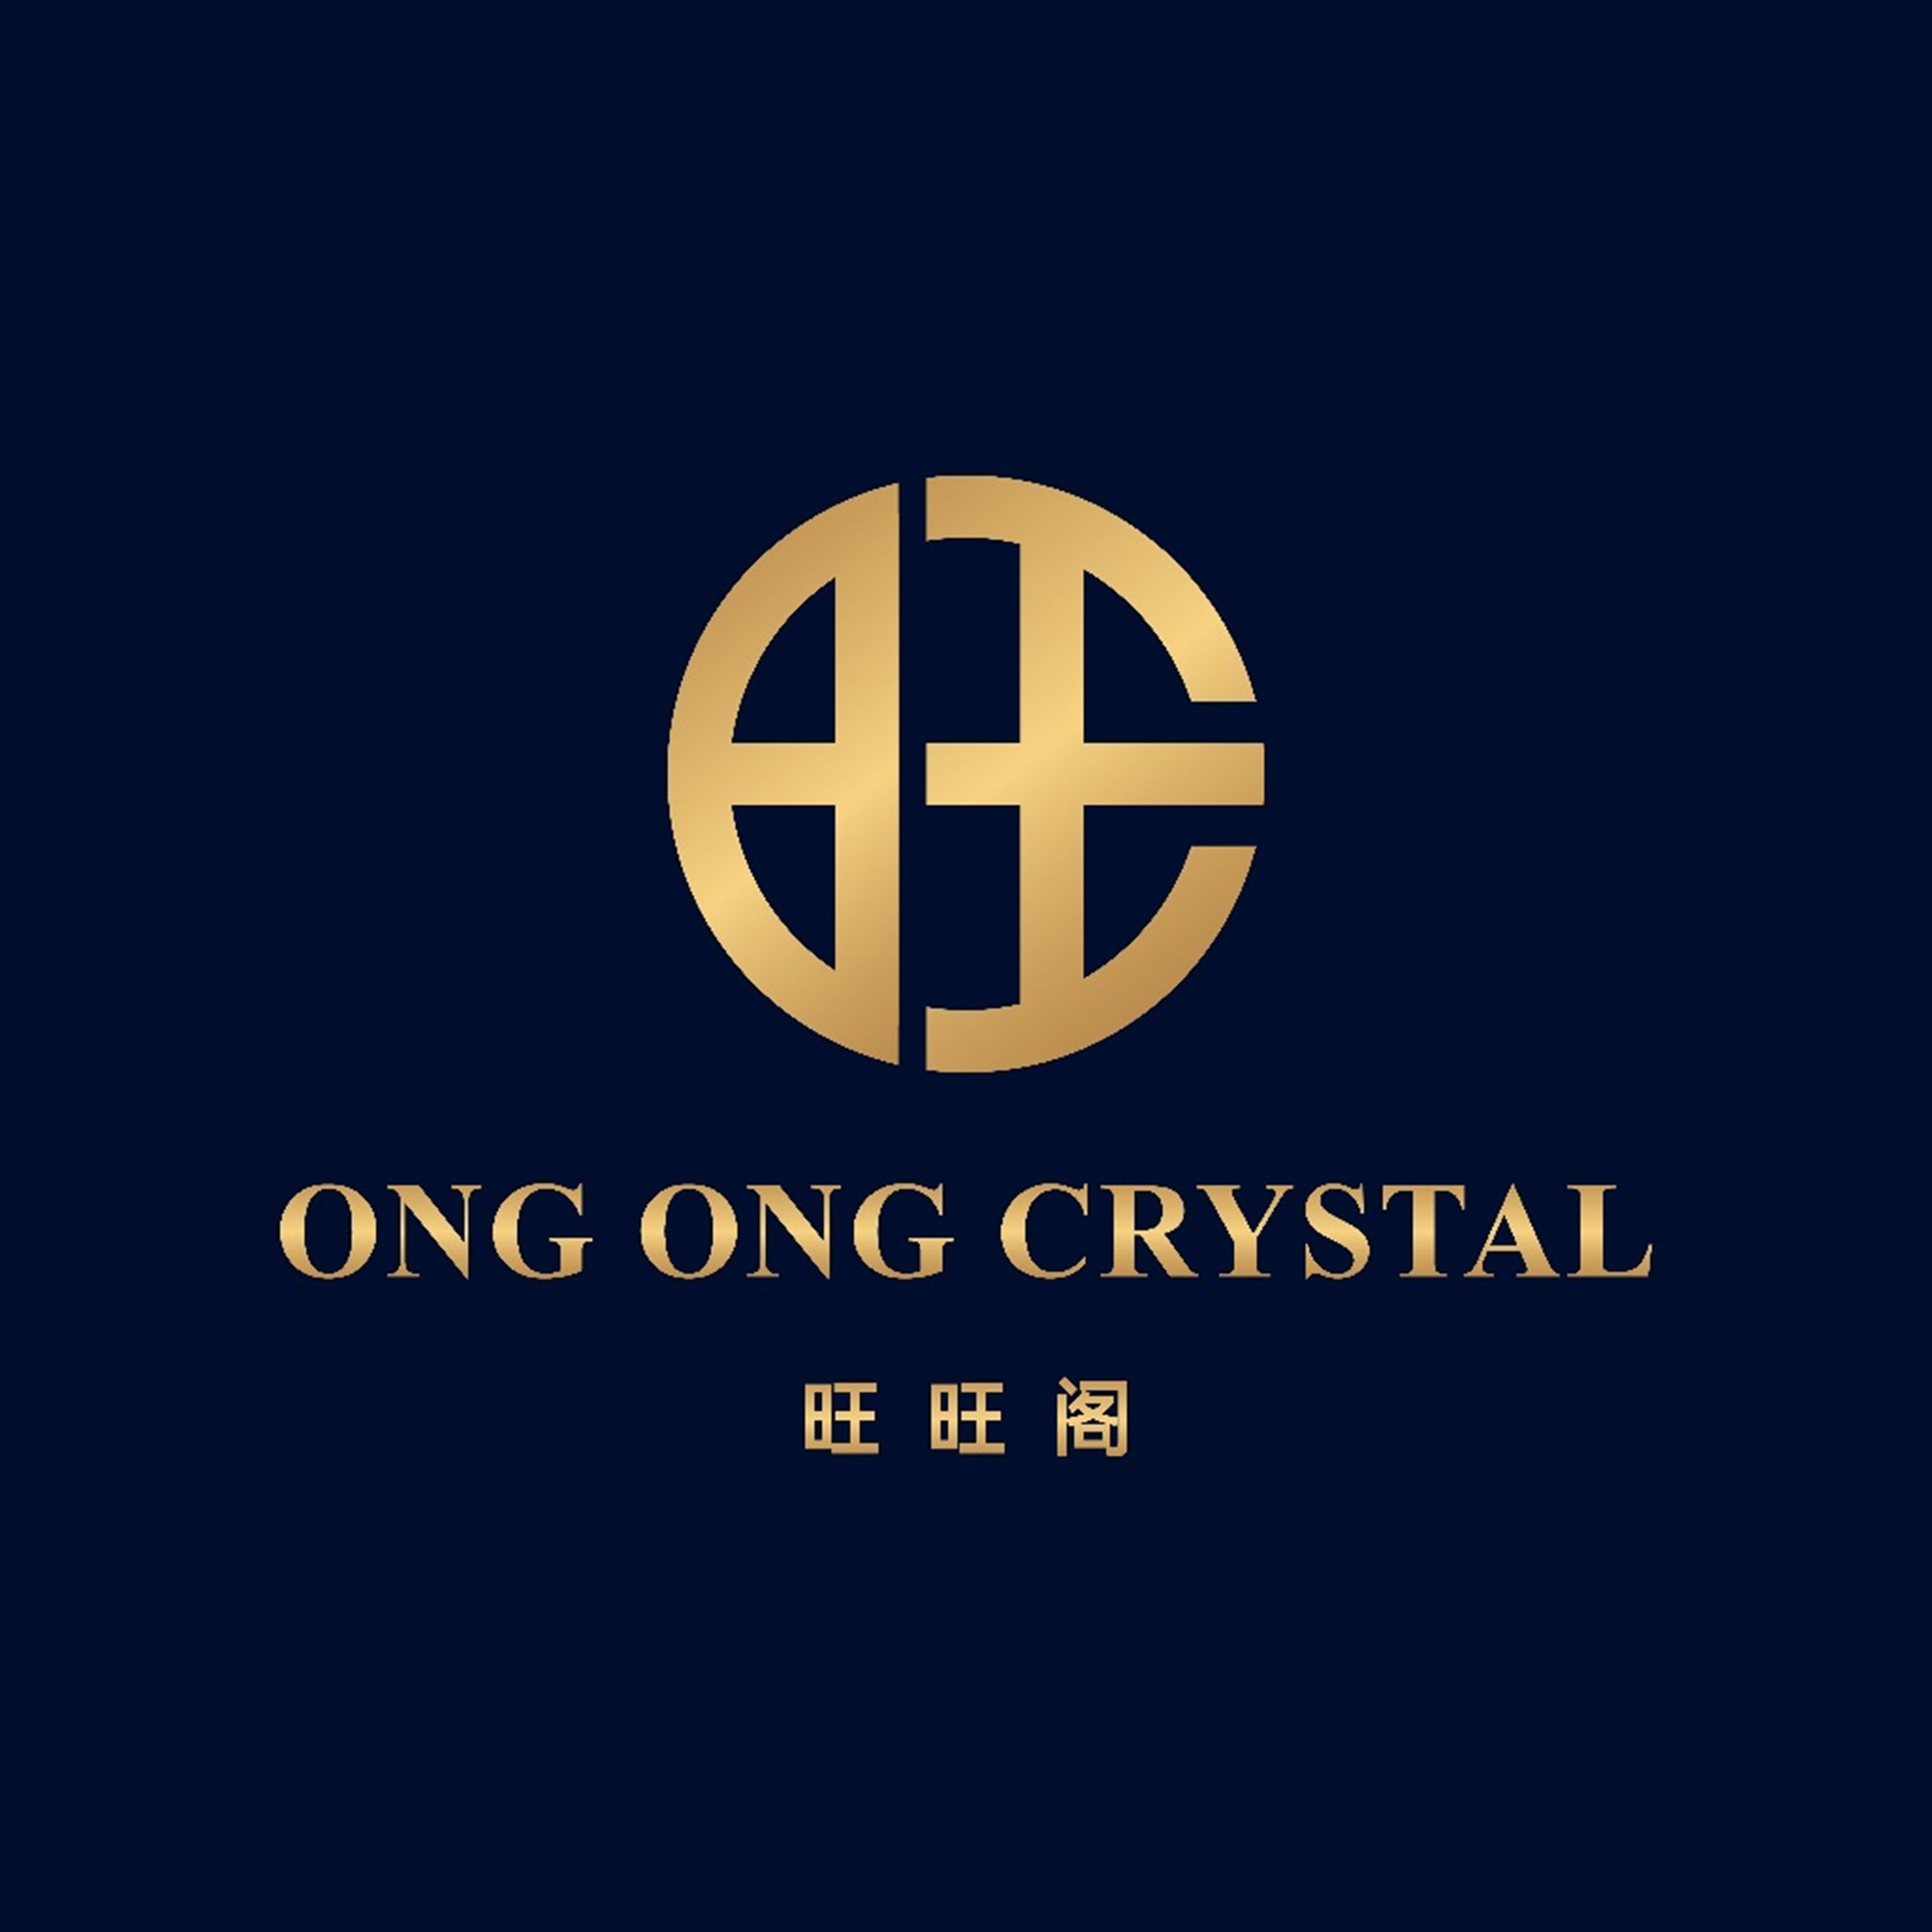 ONG ONG CRYSTAL 旺旺阁水晶店